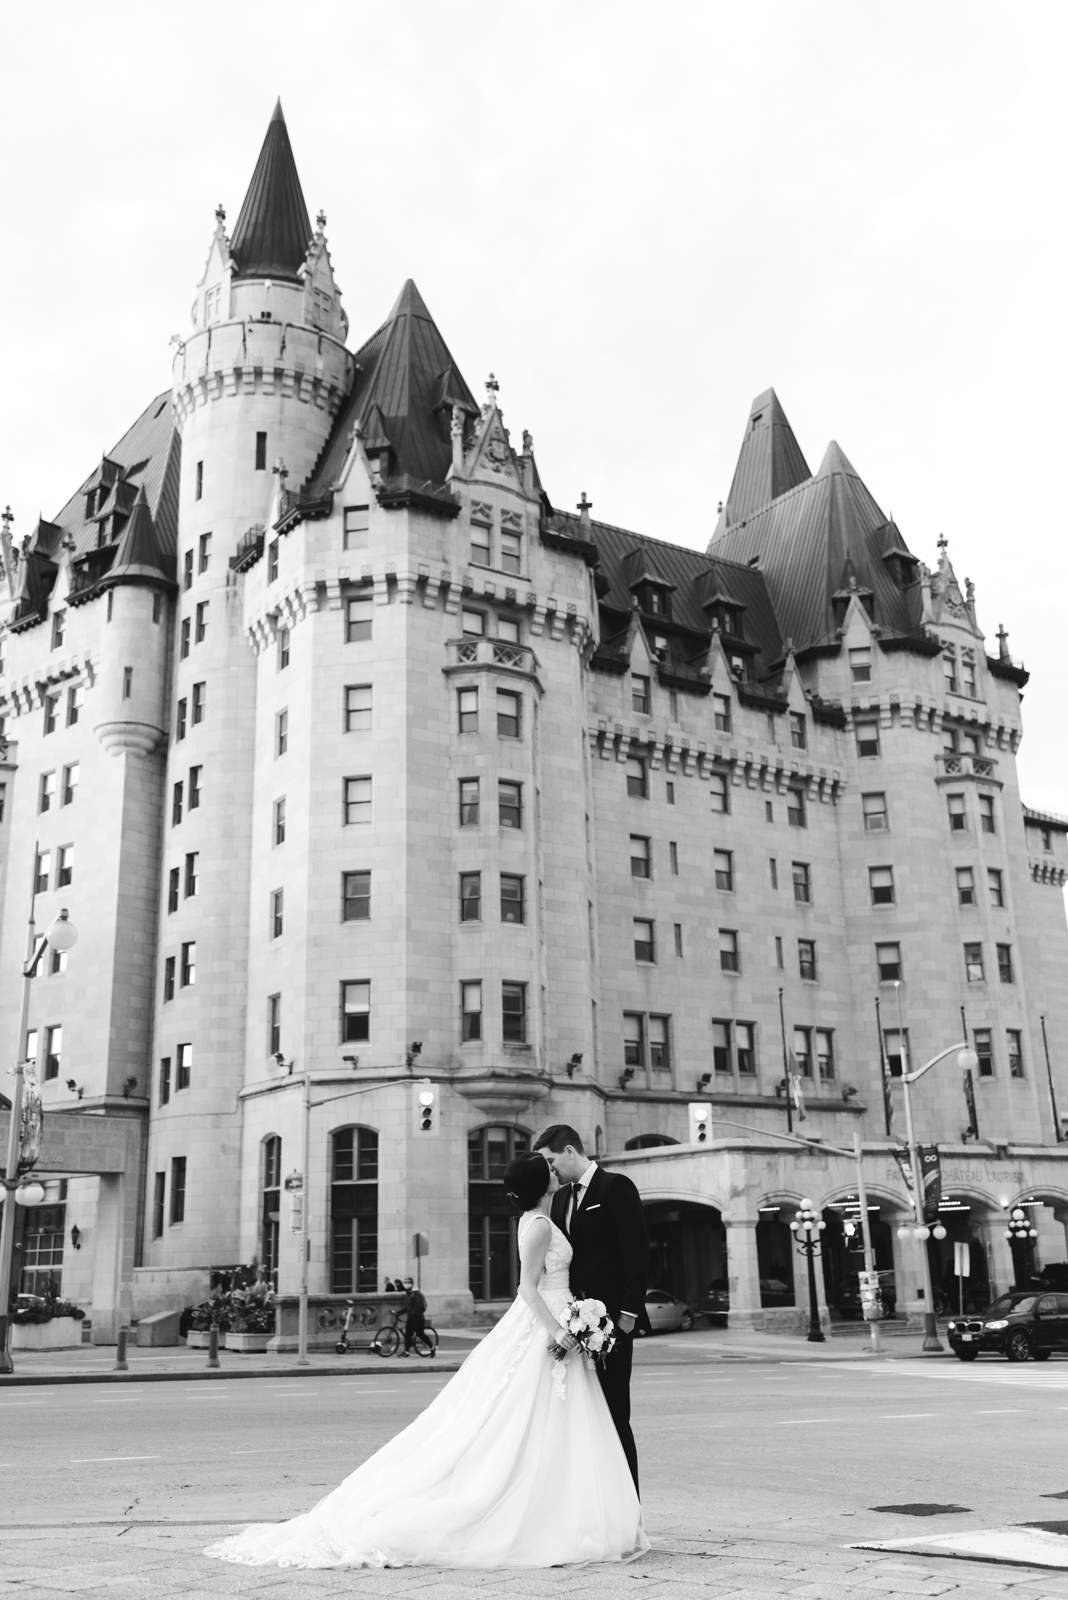 bride and groom kissing in front of chateau laurier in black and white